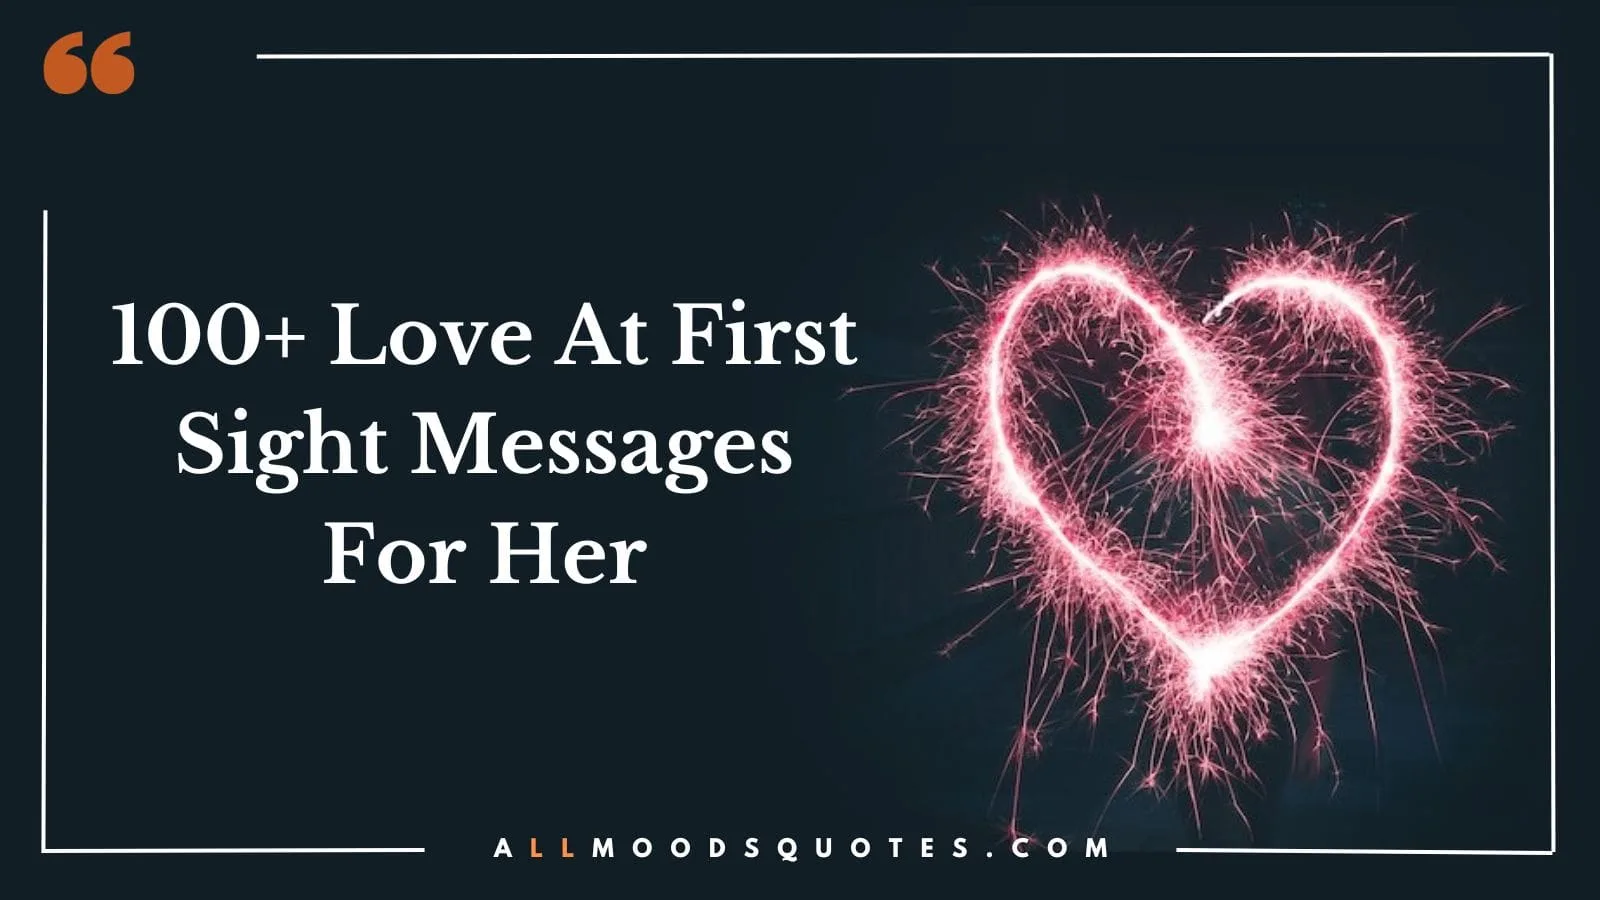 Love At First Sight Messages For Her